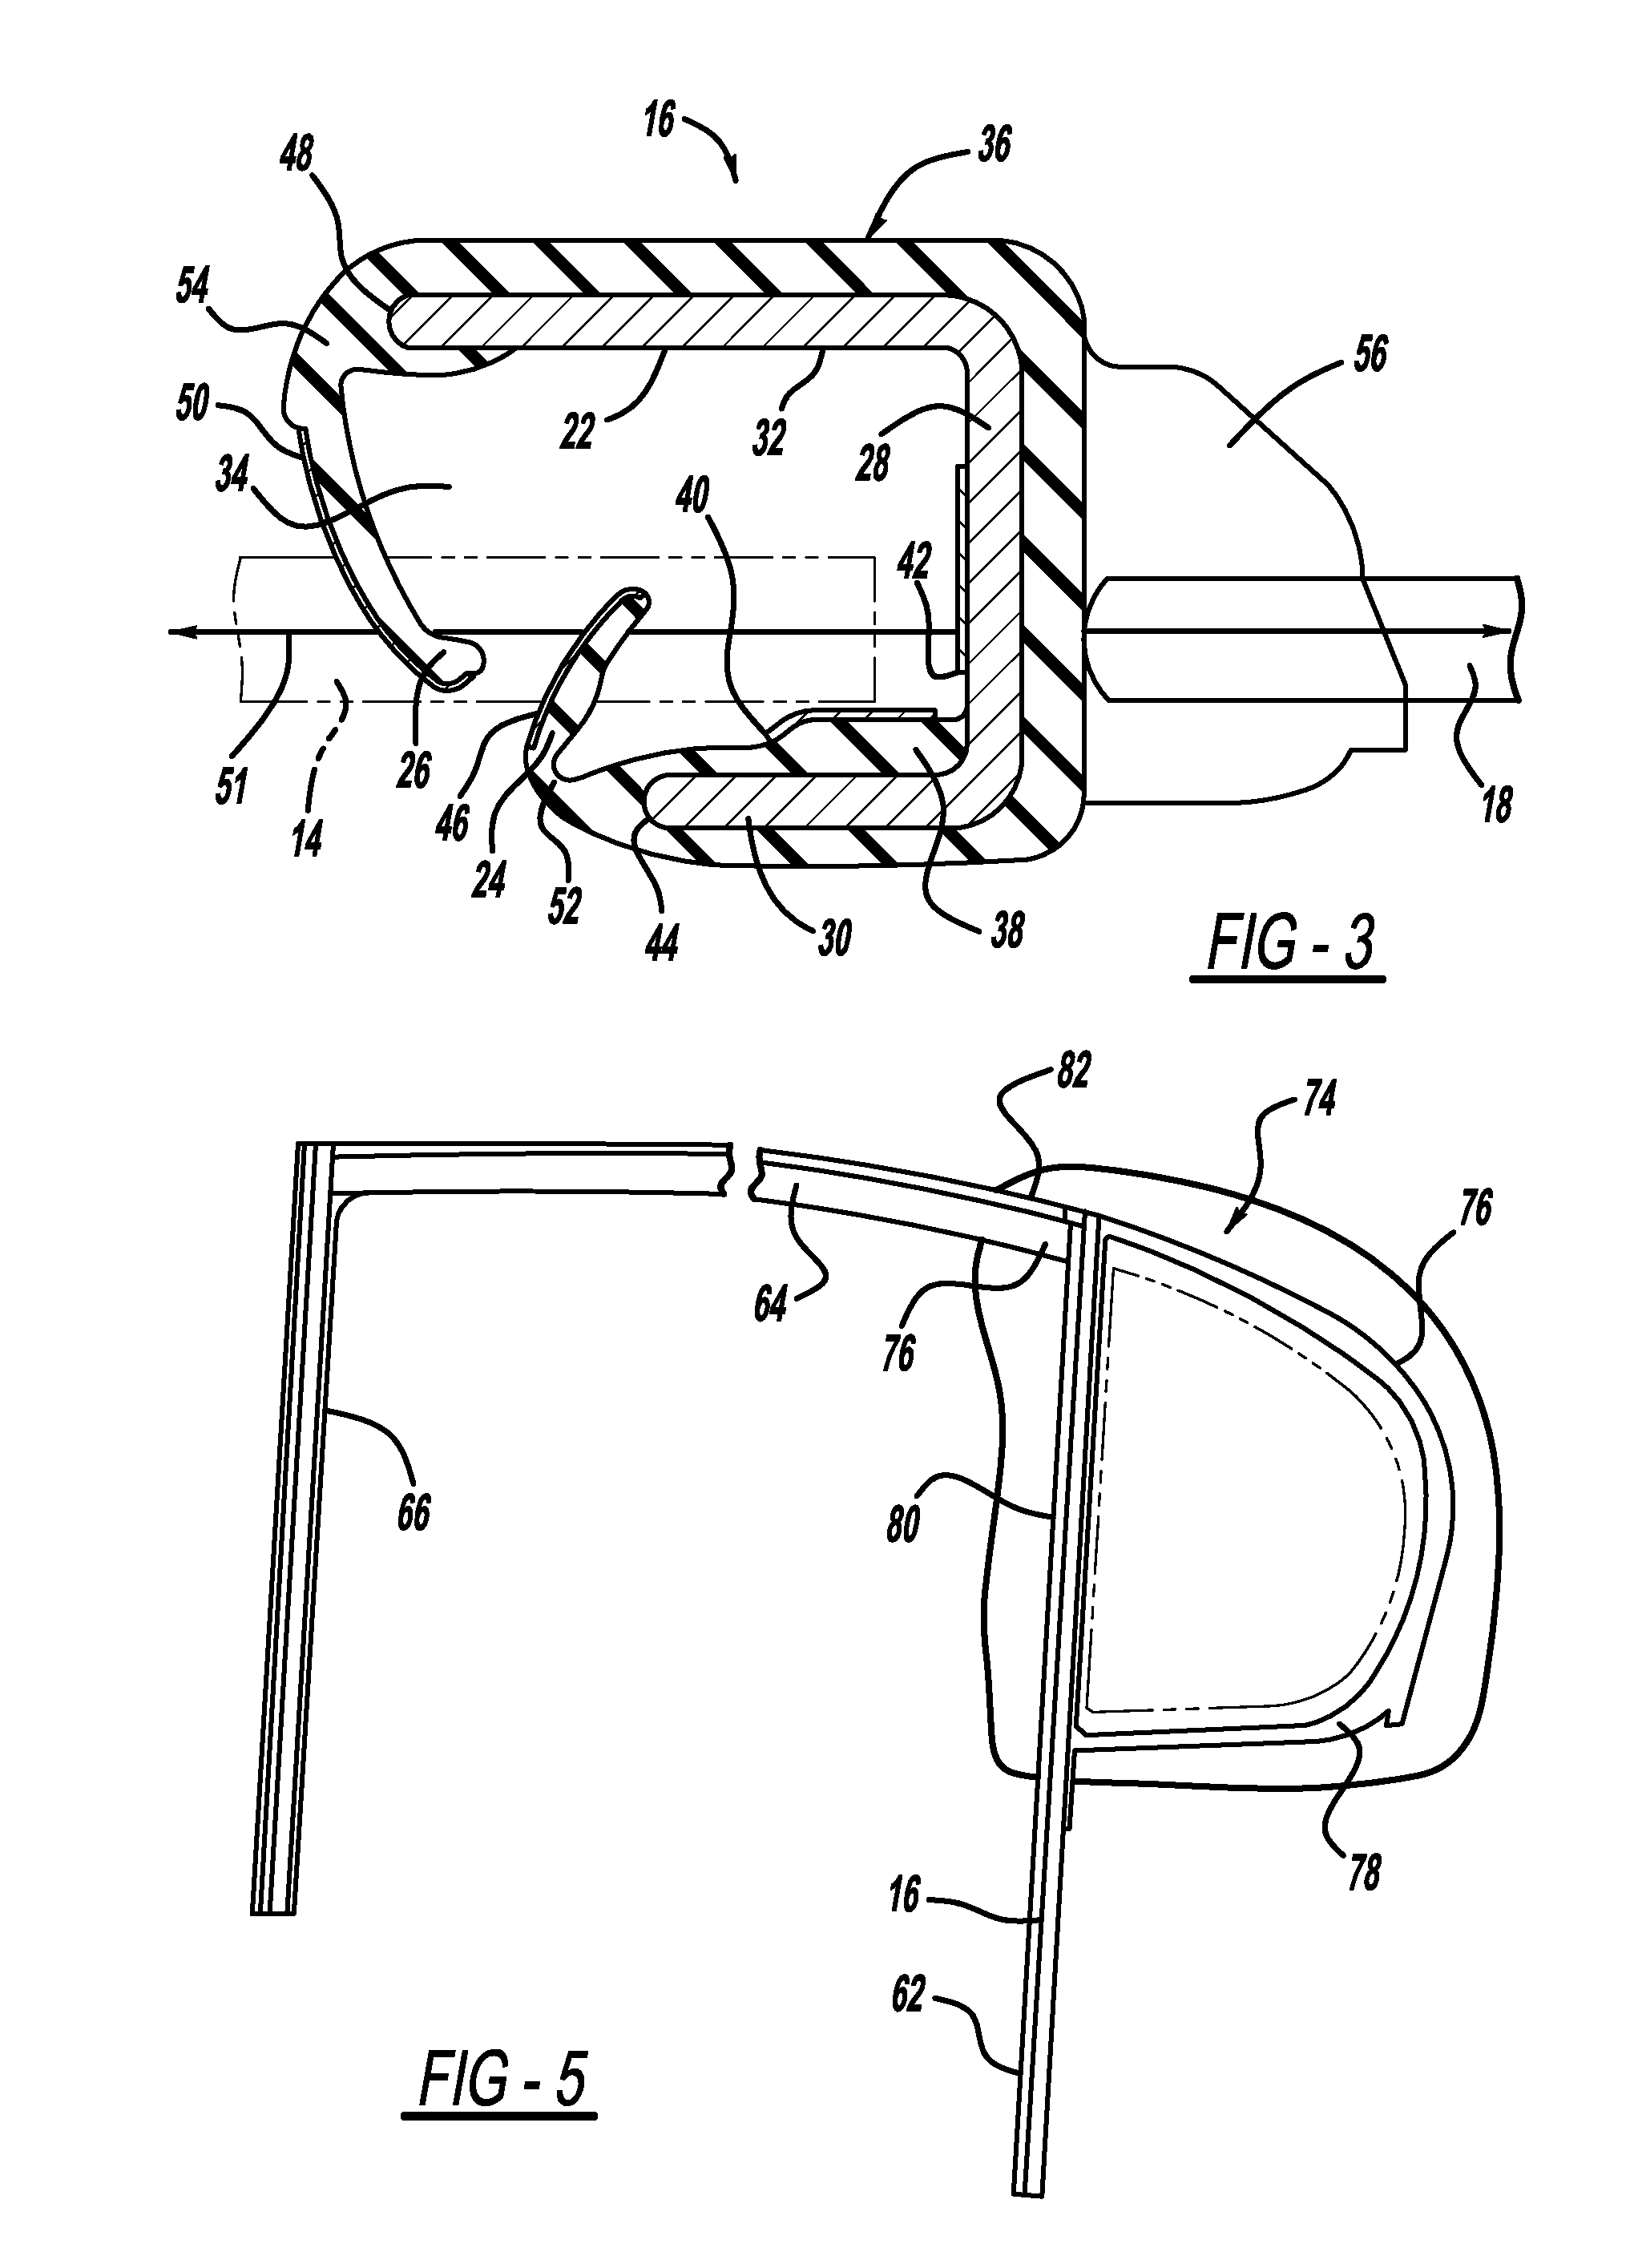 Method of forming unsupported division post for automotive glass encapsulation